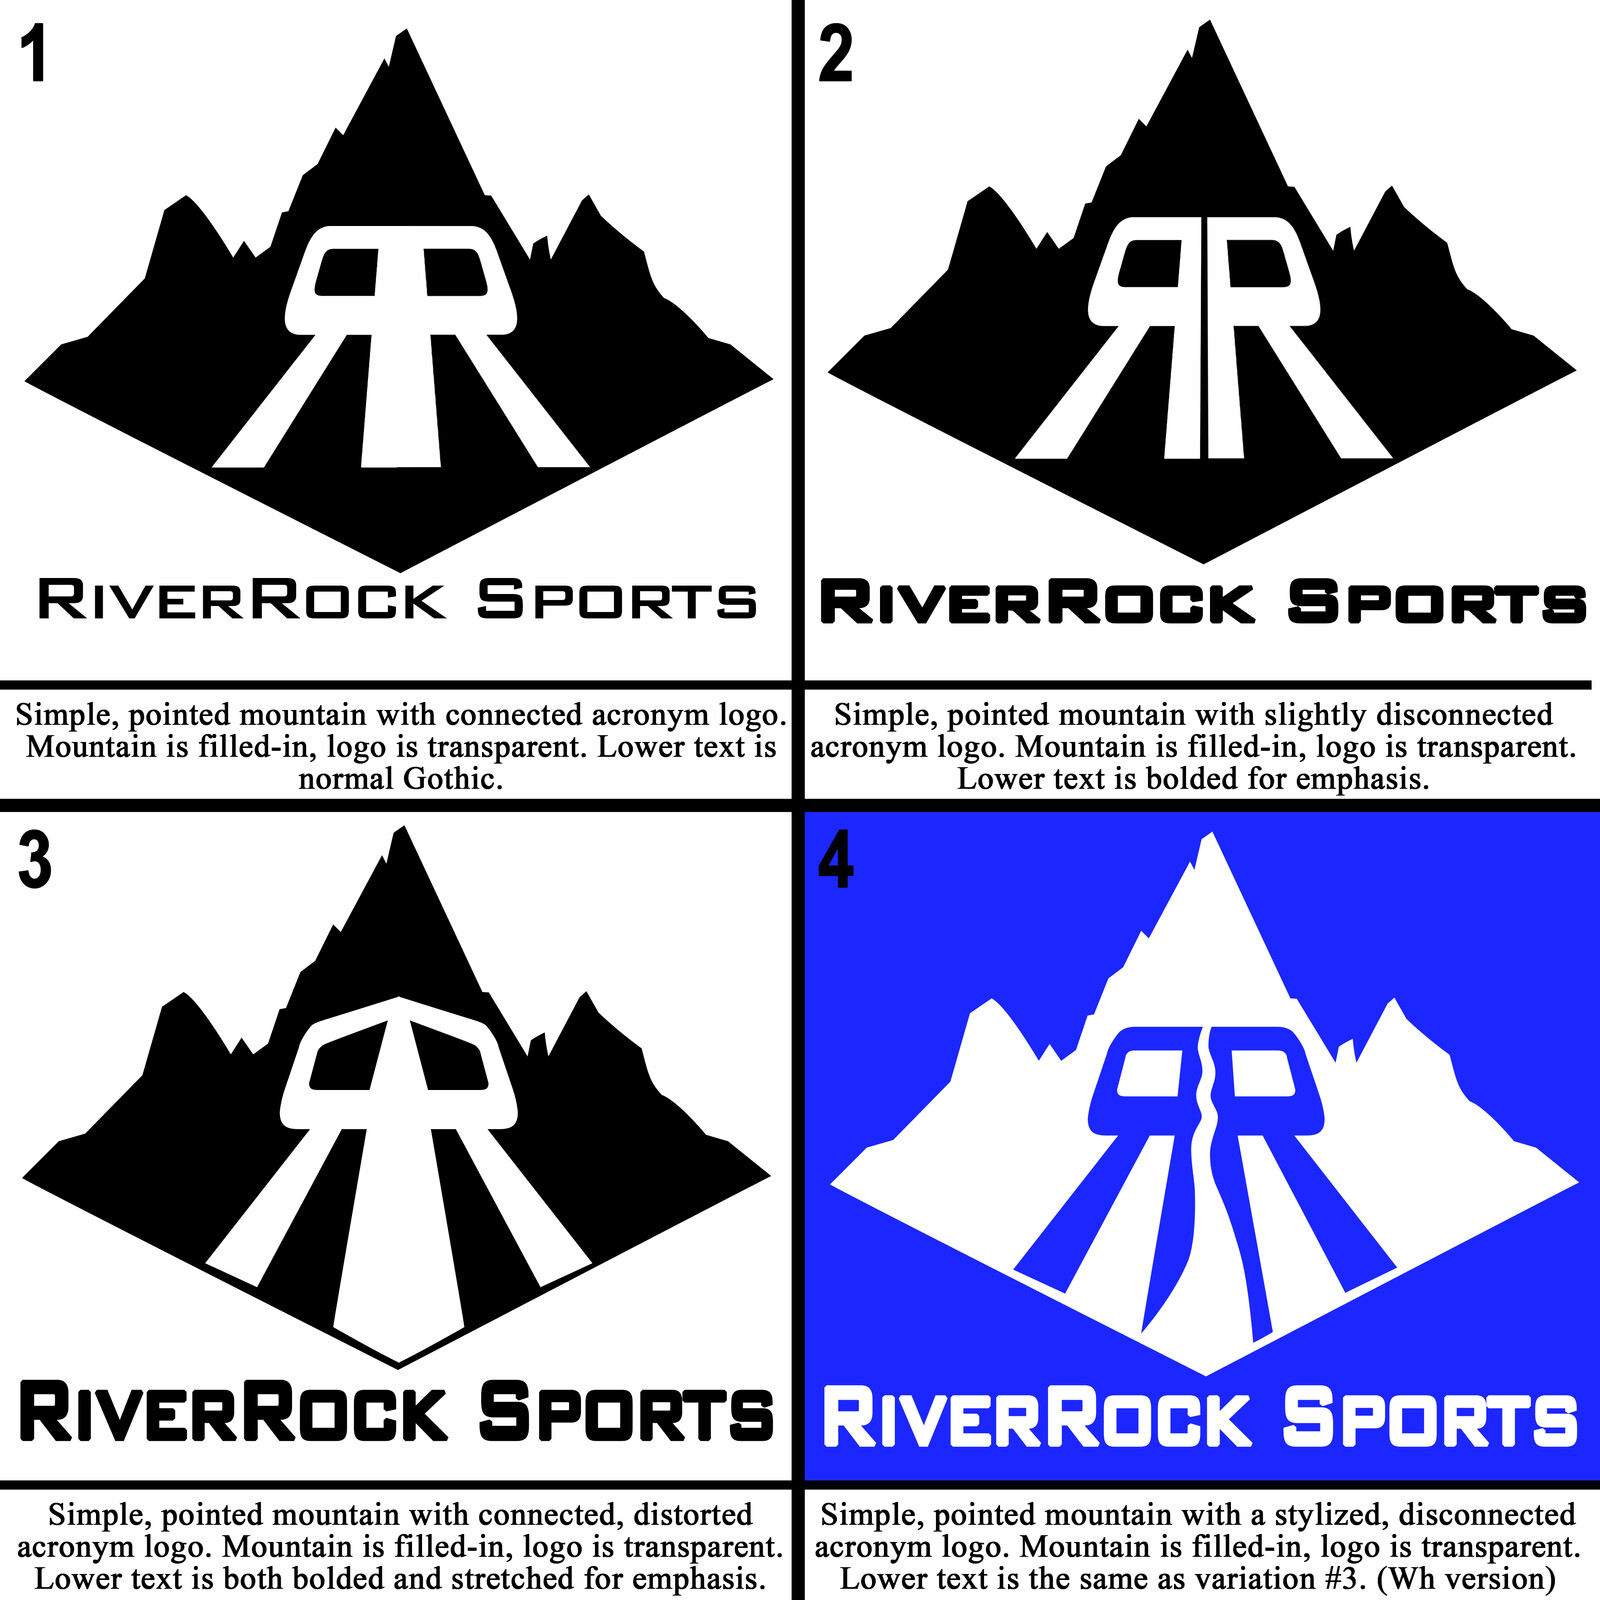 The first batch of concept iterations for the RRSM logo